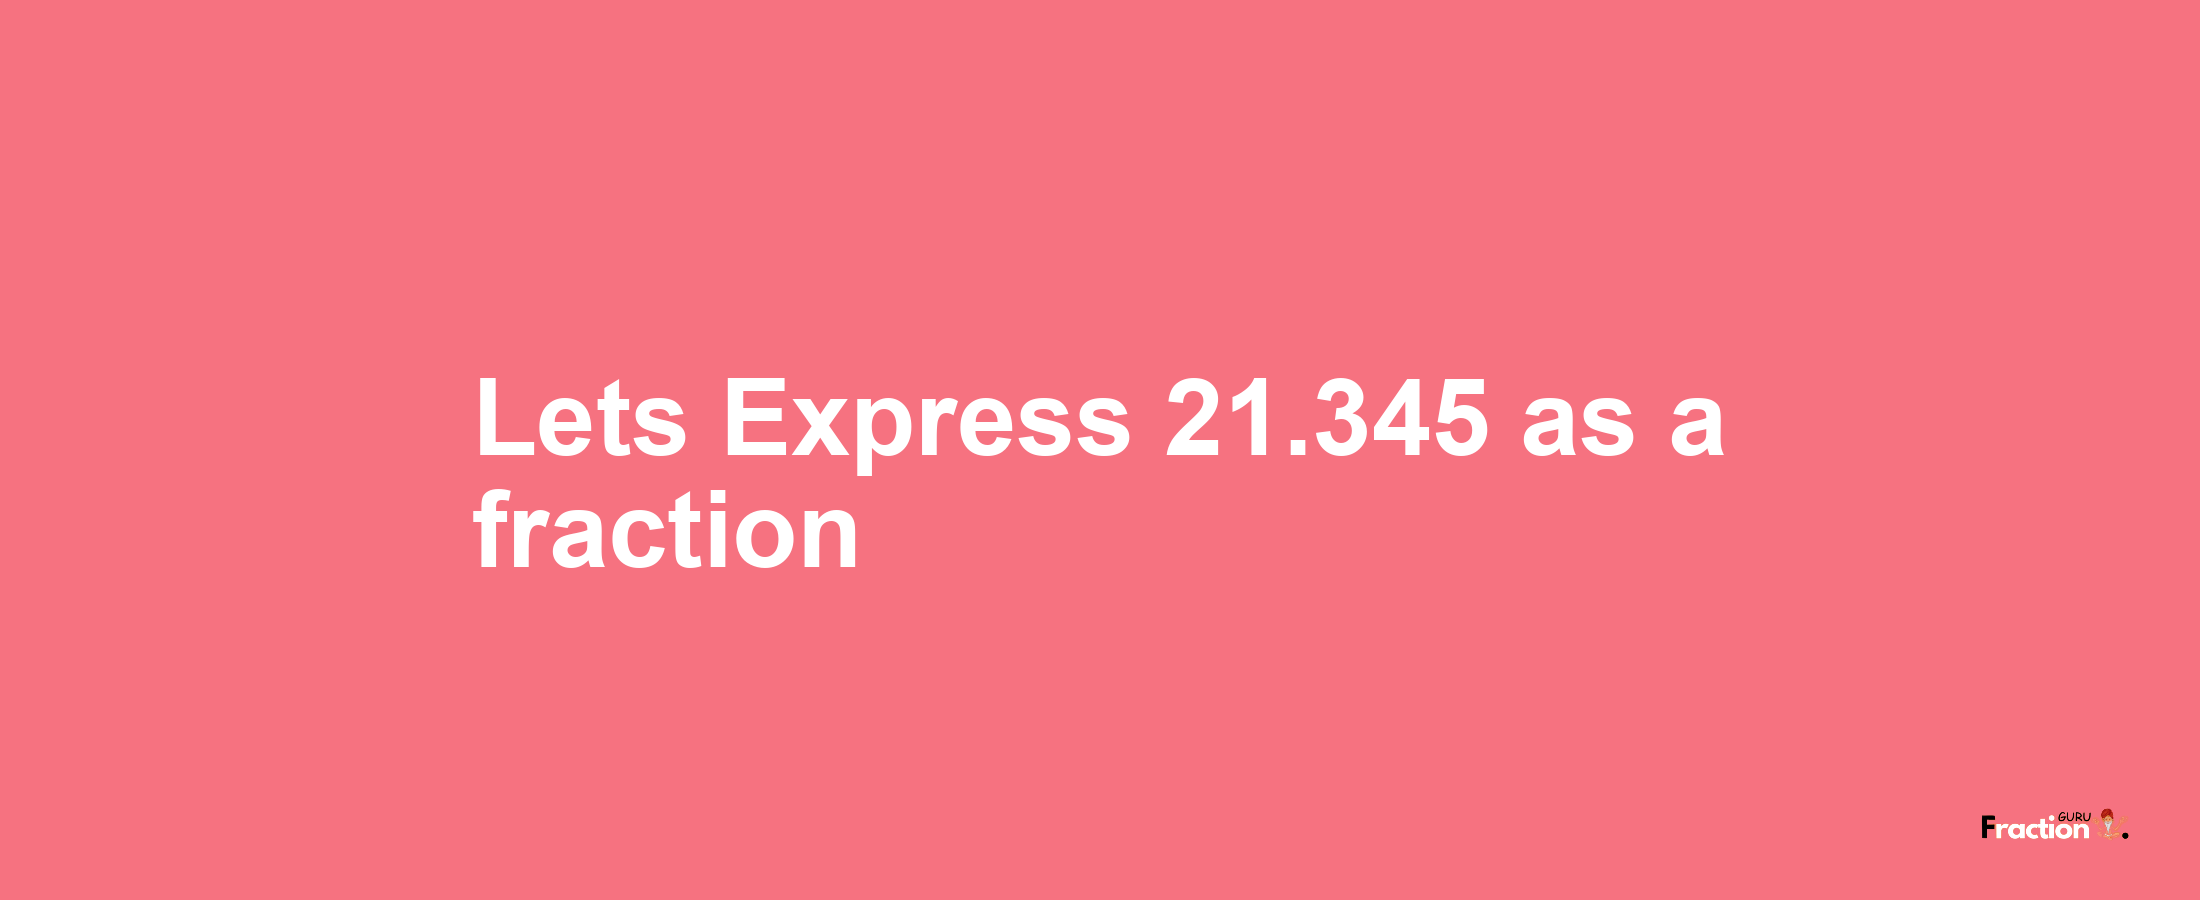 Lets Express 21.345 as afraction